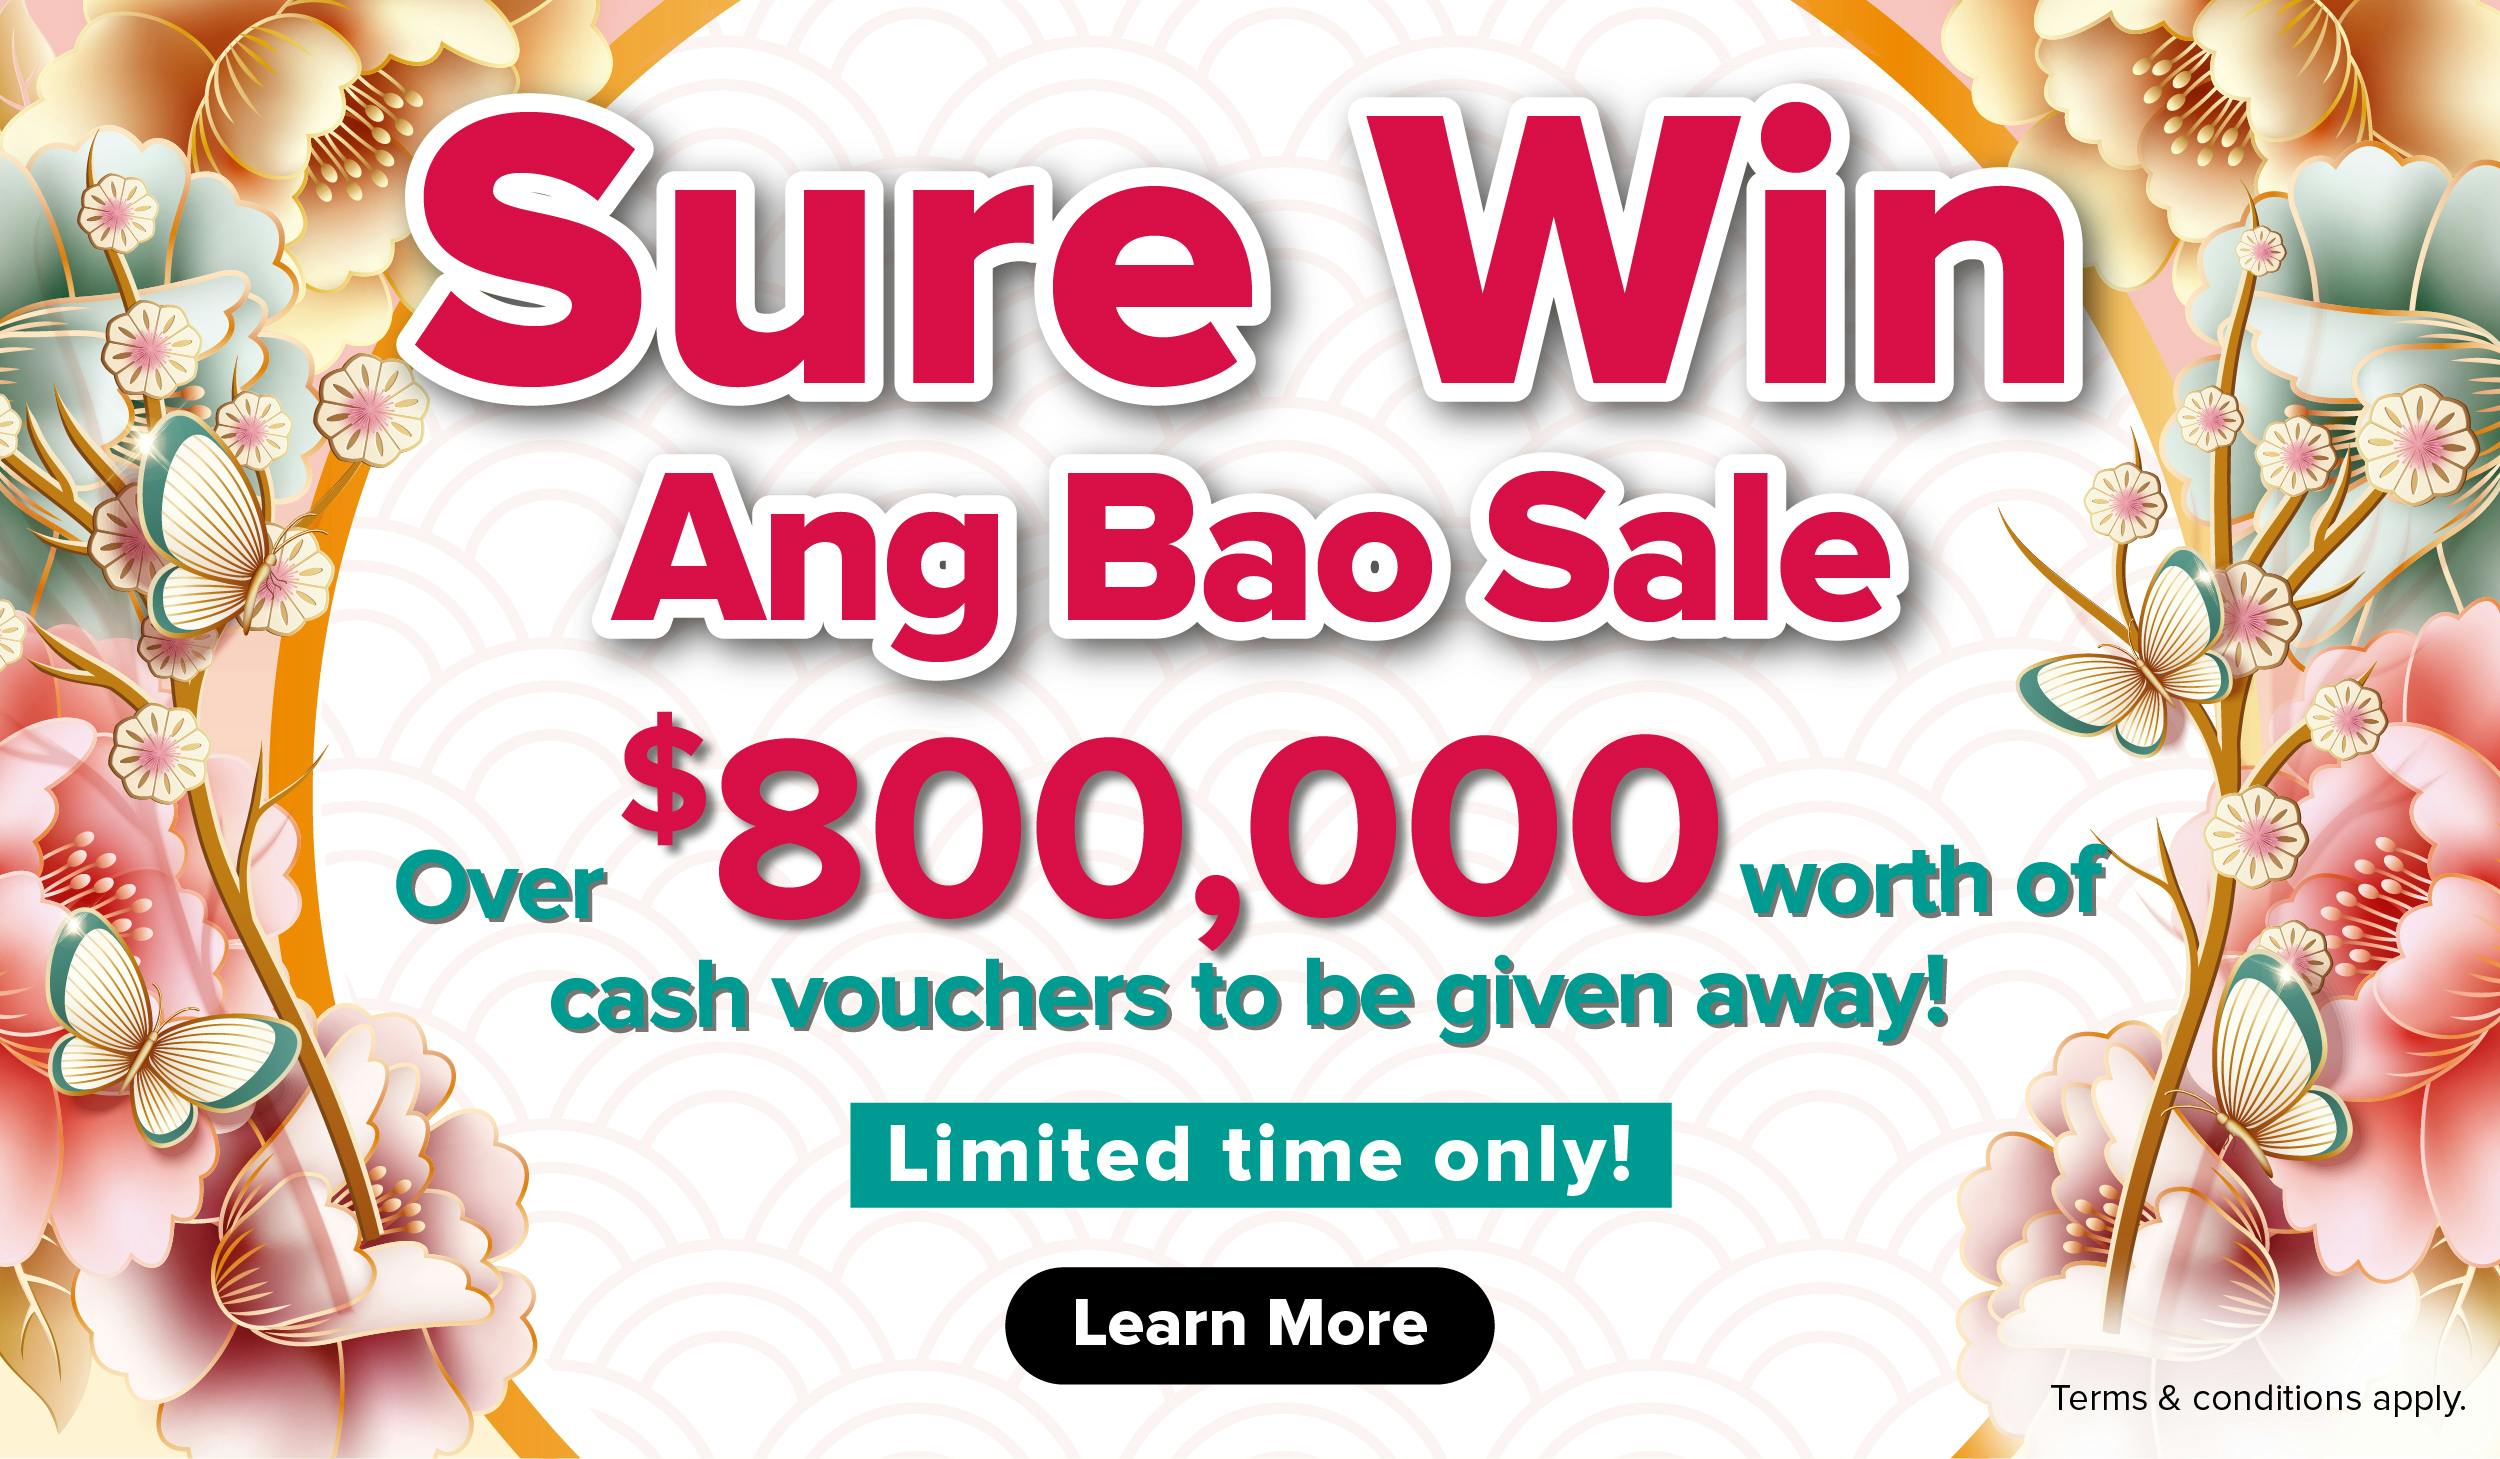 Sure Win Ang Bao Sale (6 to 26 Jan 2022) - Global Product Page Banner